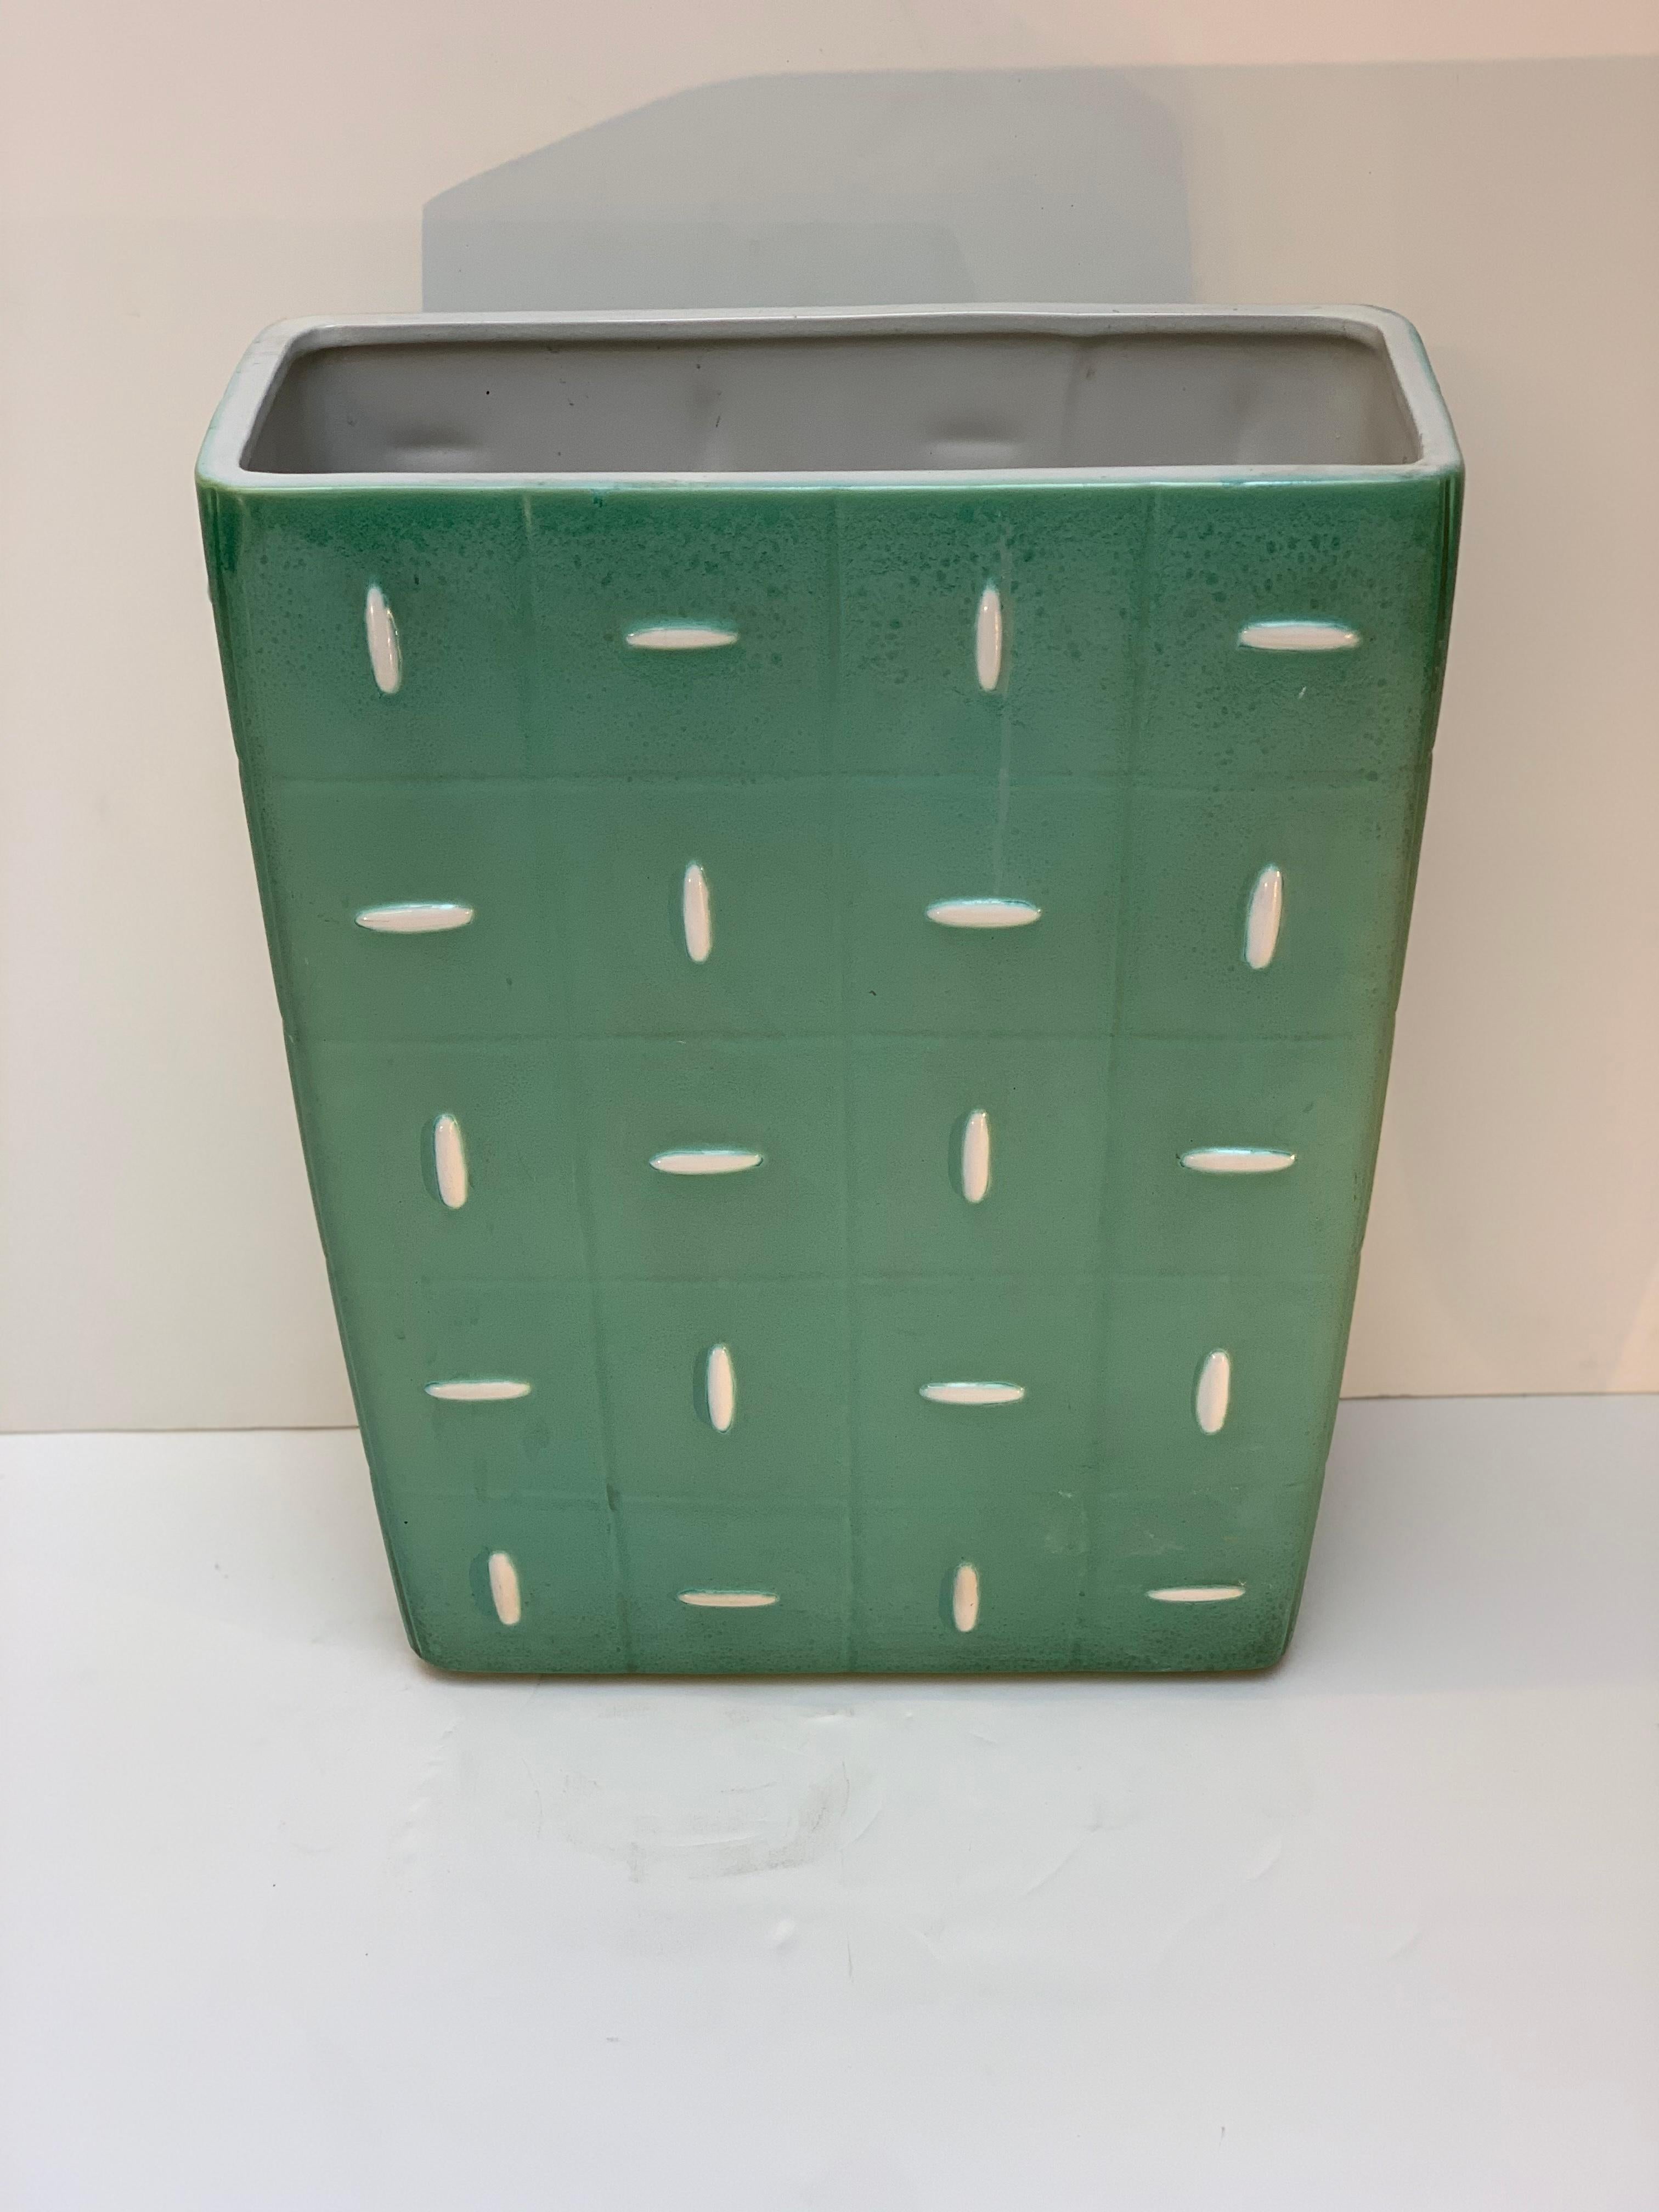 Squared section green and white ceramic umbrella Stand by Giovanni Gariboldi for Richard Ginori S. Cristoforo Milano Italy ,decorated with geometric relief ,signed on the bottom base .
Inside the ceramic umbrella holder is equipped with a removable